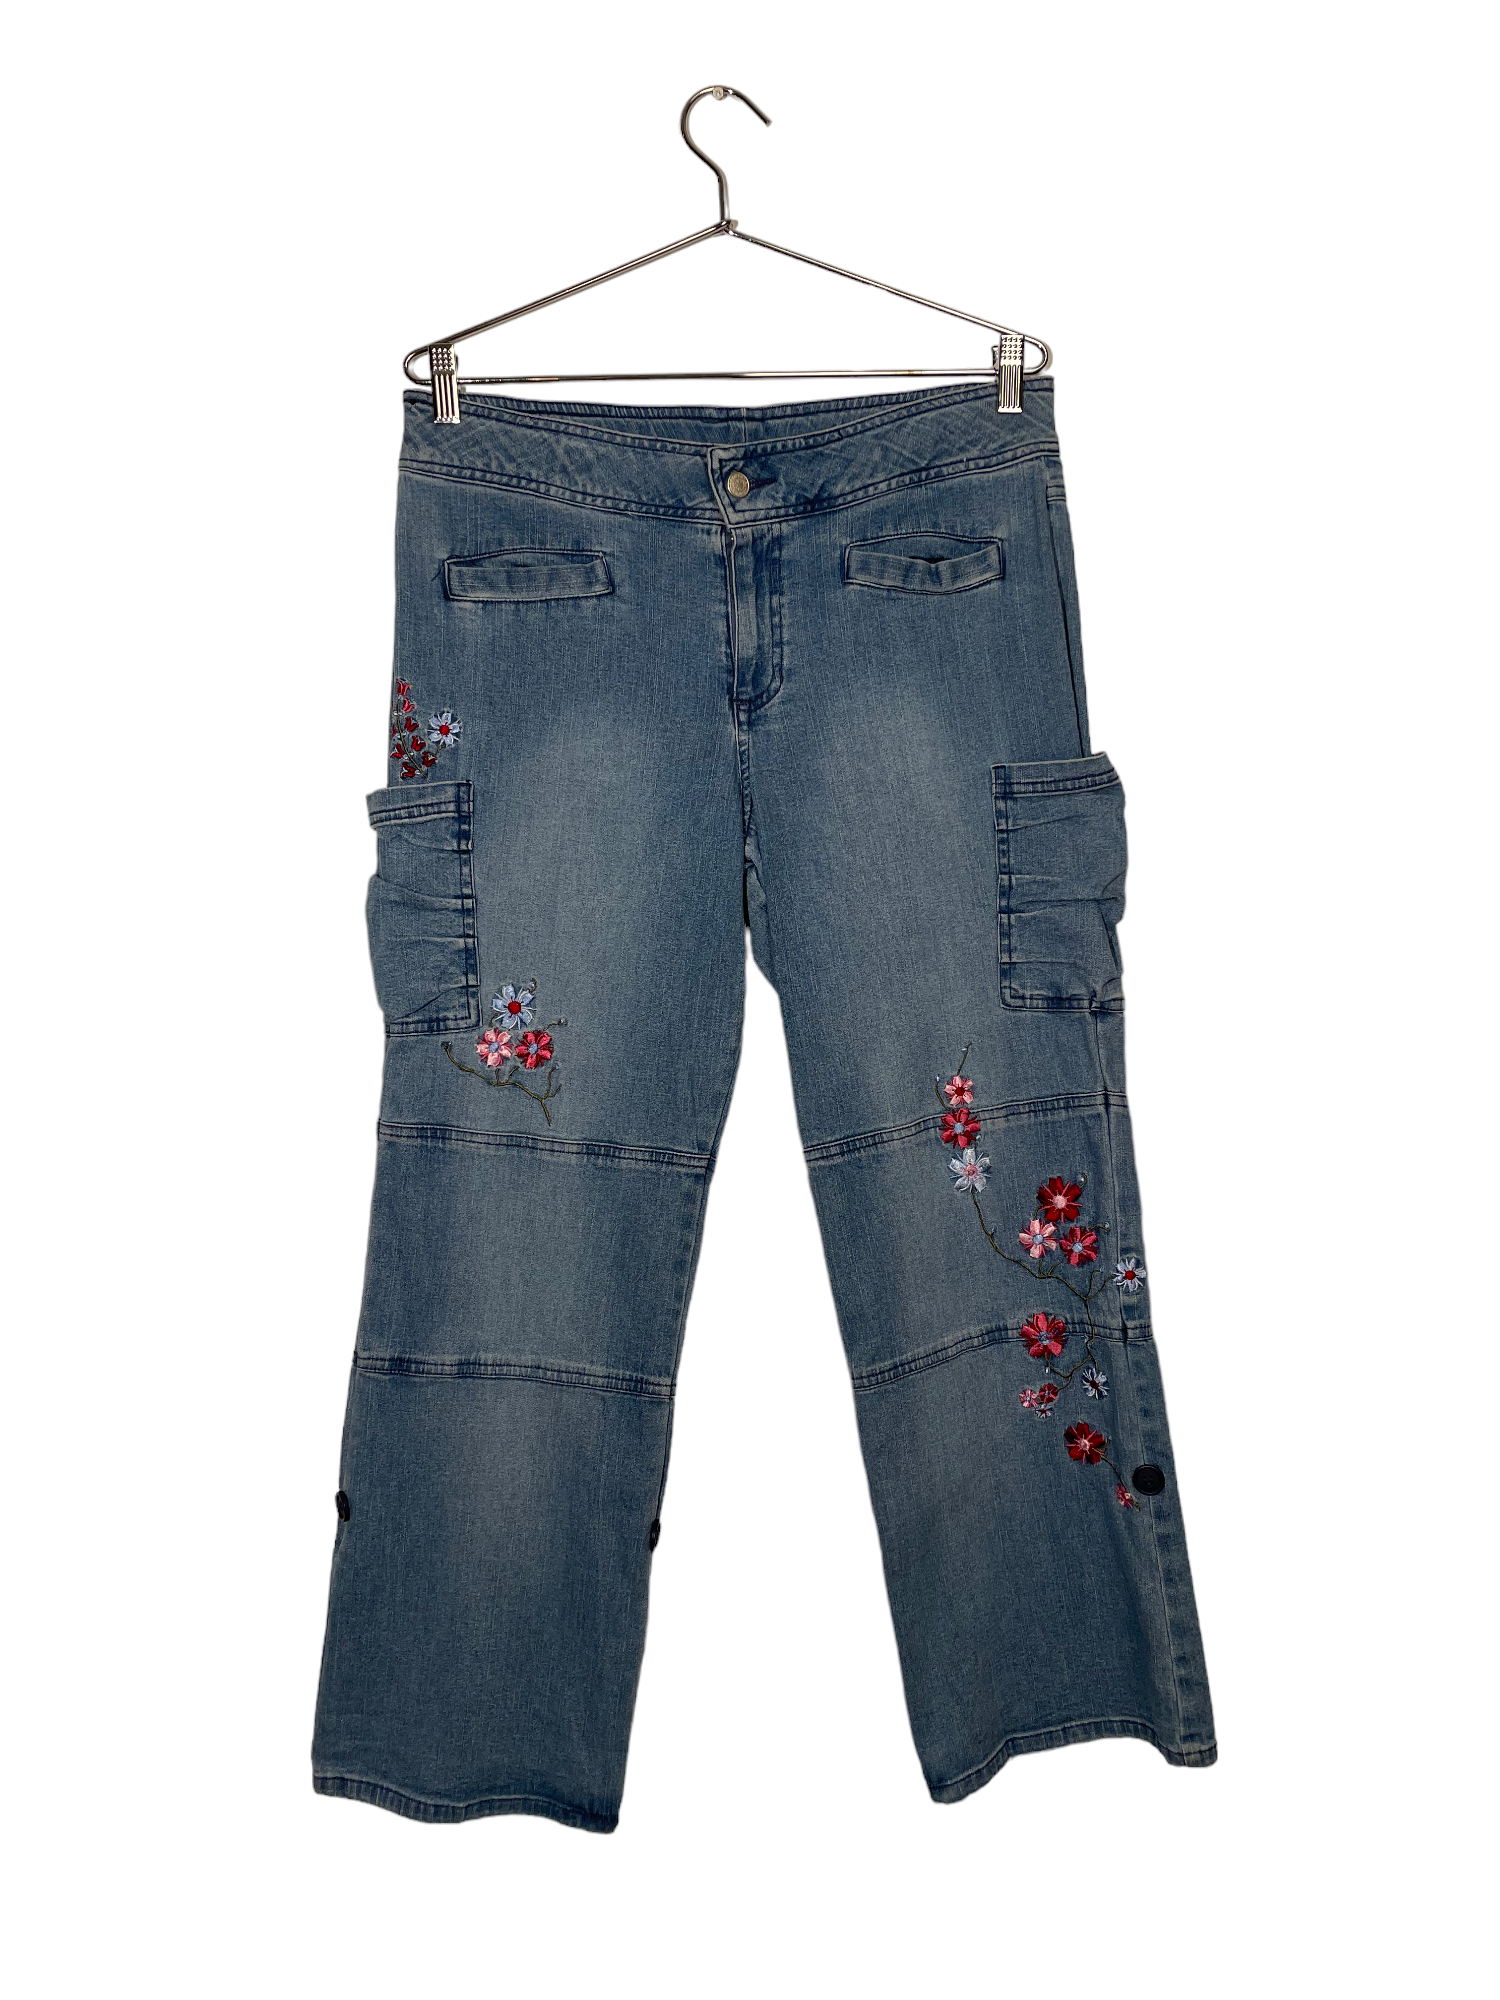 Denim Pants With Flower Embroidery